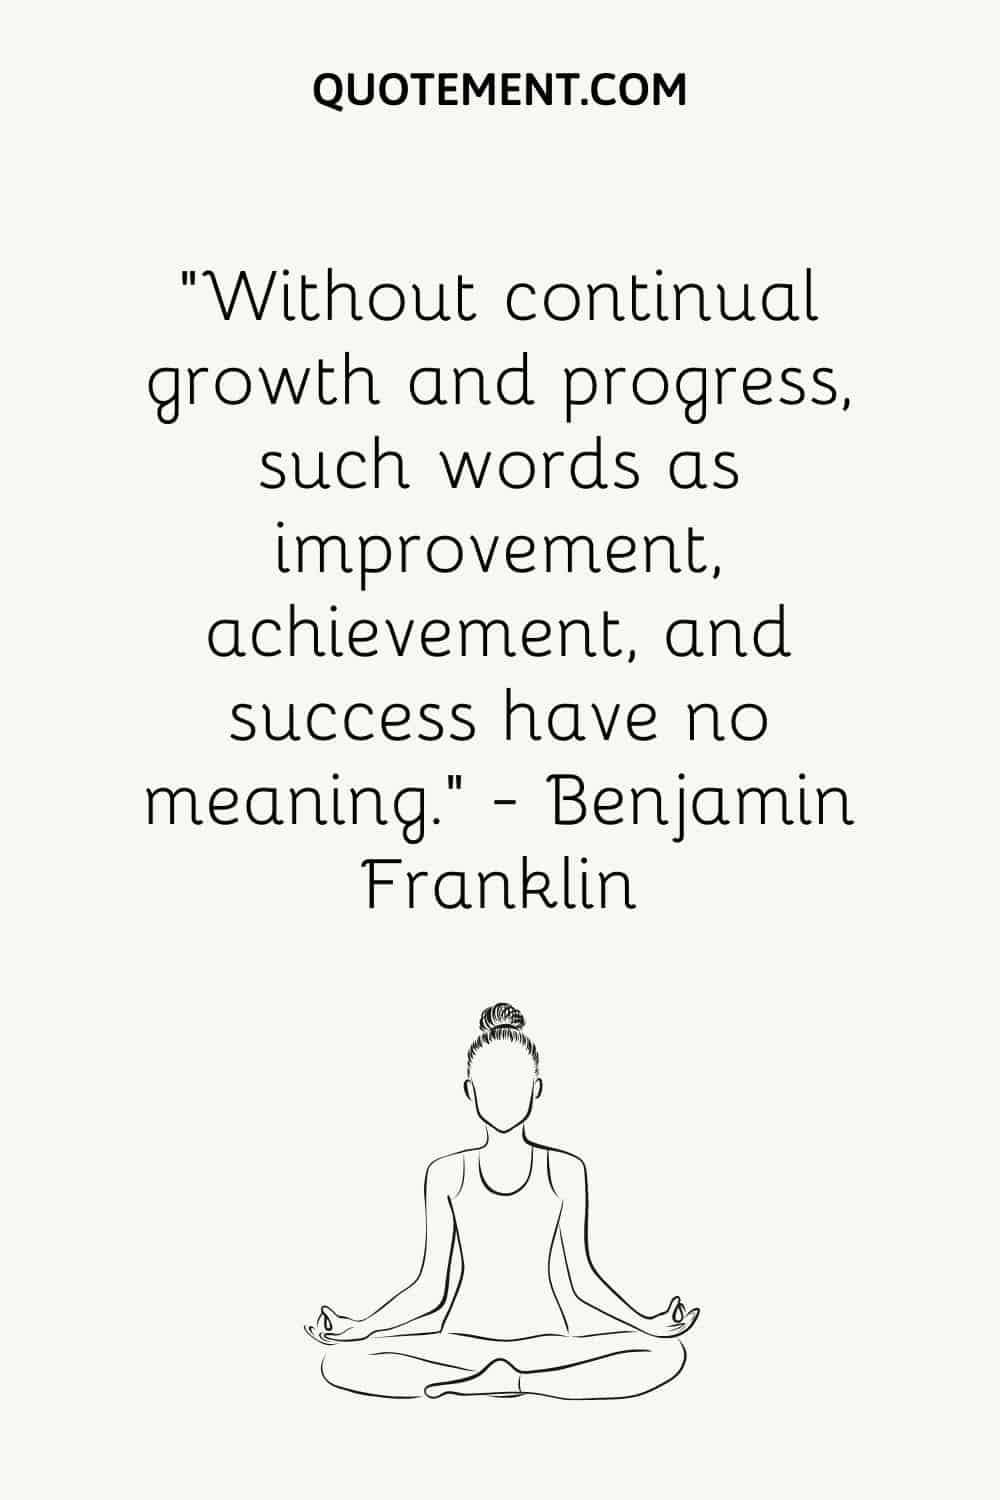 Without continual growth and progress, such words as improvement, achievement, and success have no meaning